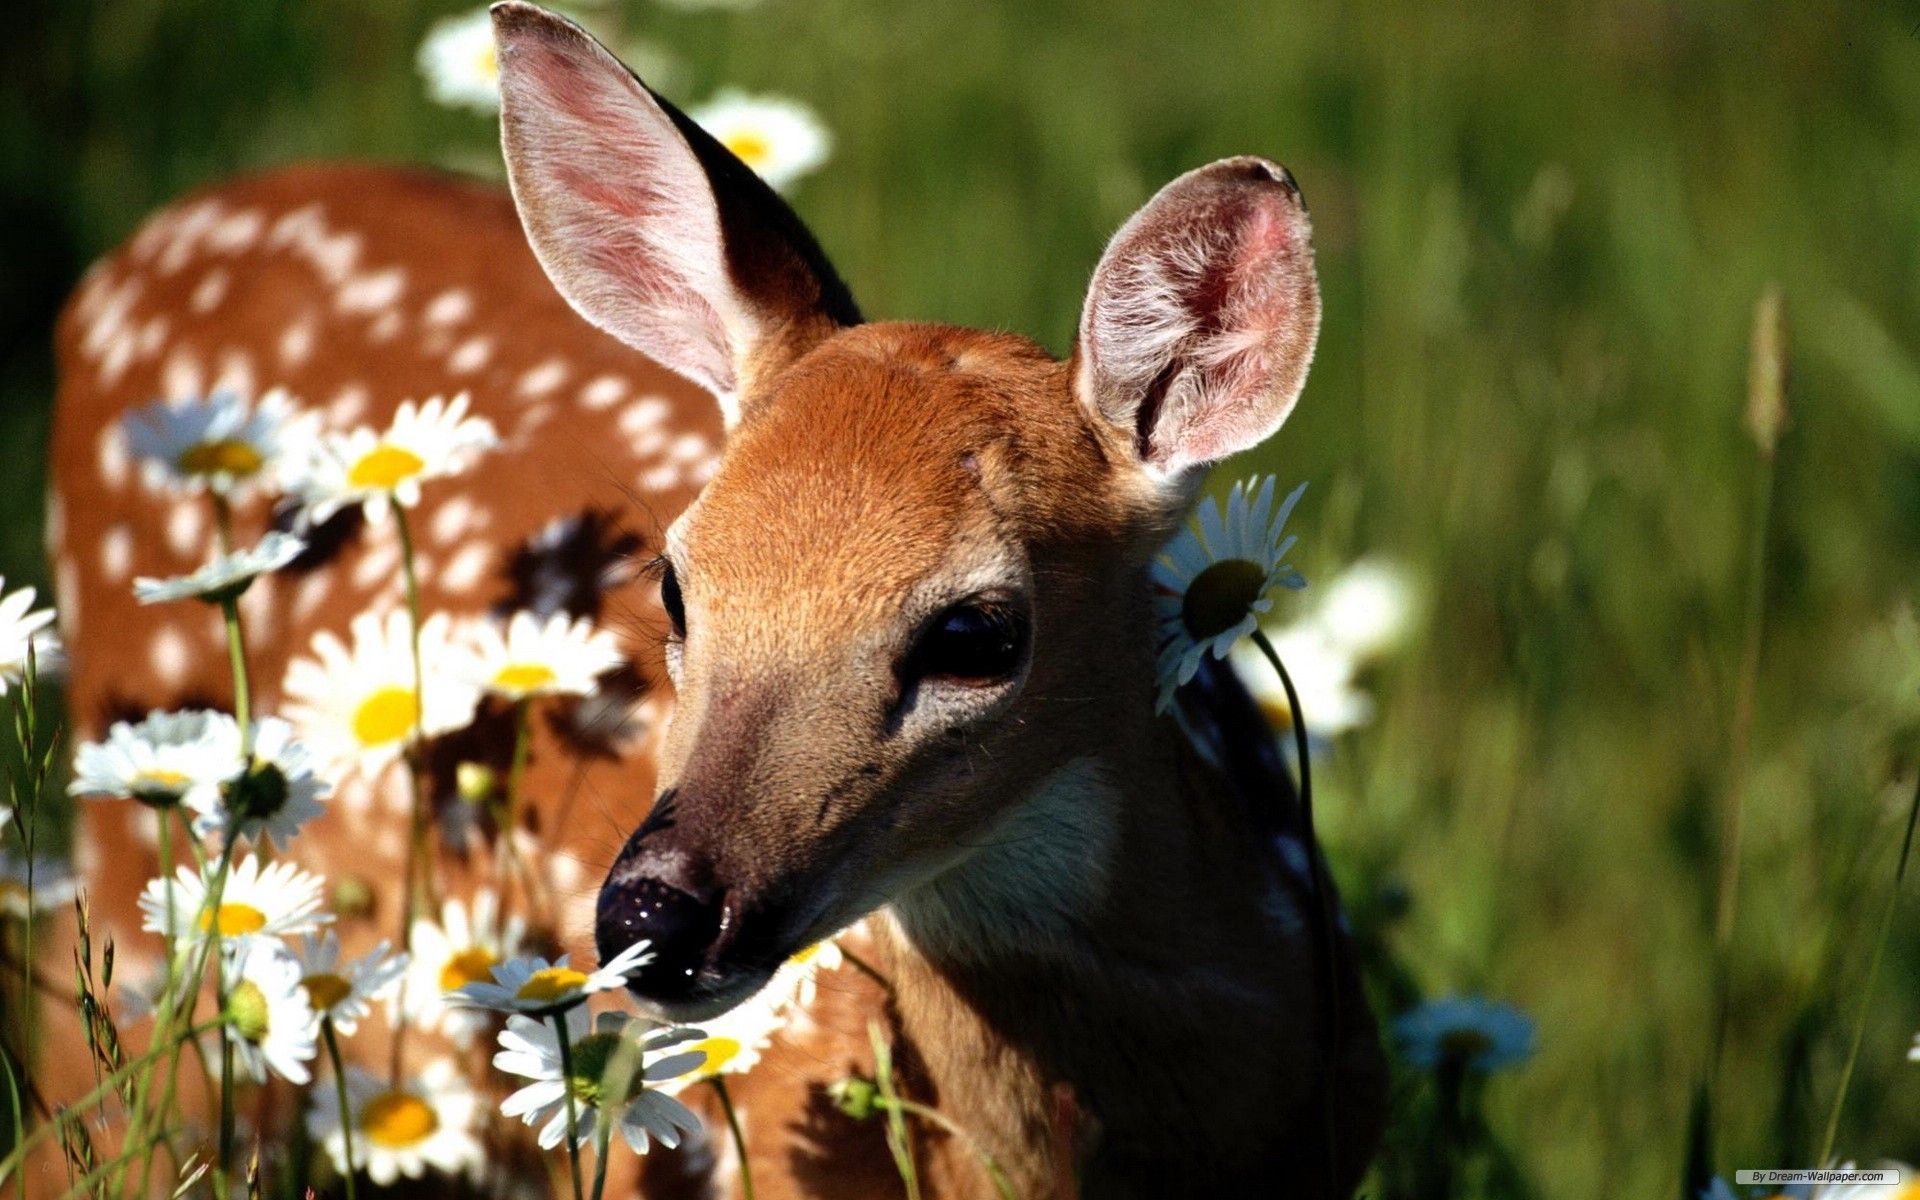 A fawn in the grass and flowers - Deer